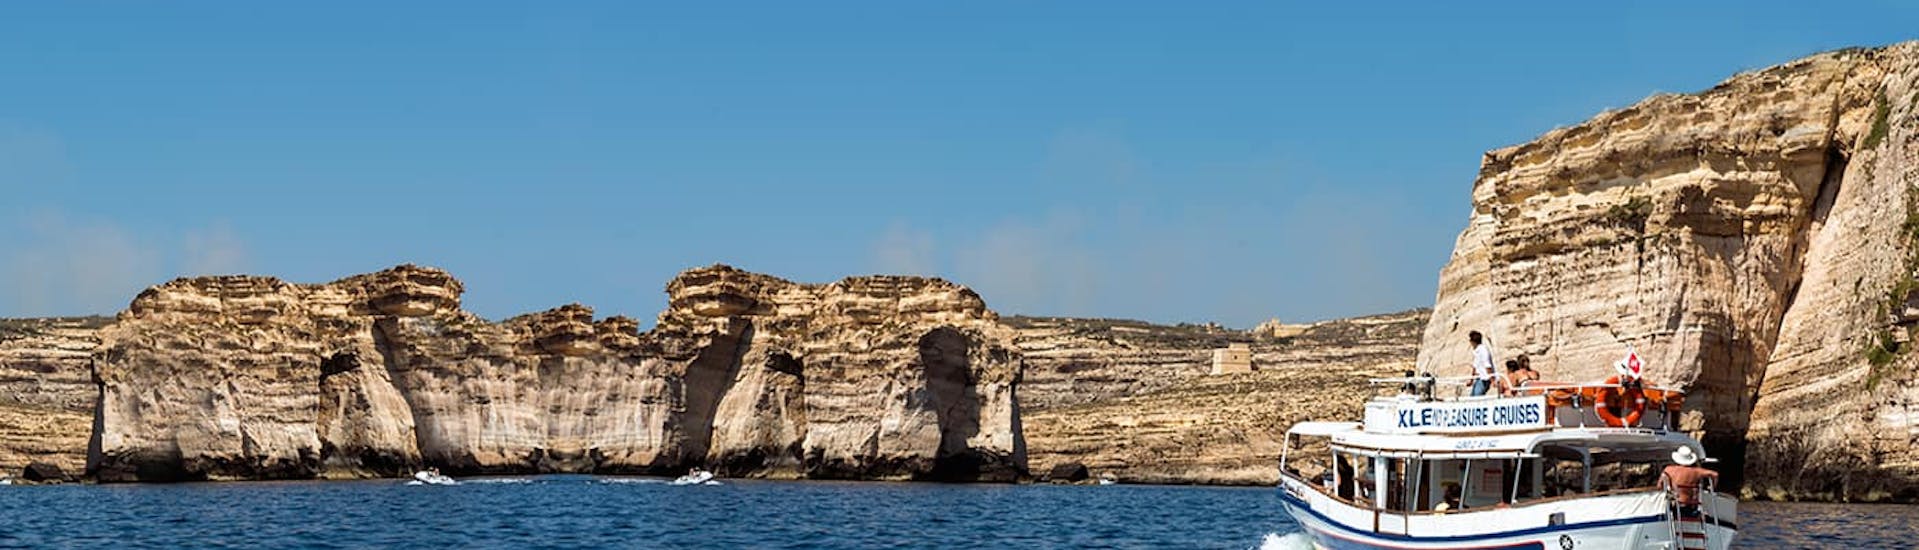 Boat of Xlendi Pleasure Cruise during the boat Trip from Mgarr around Gozo and Comino.